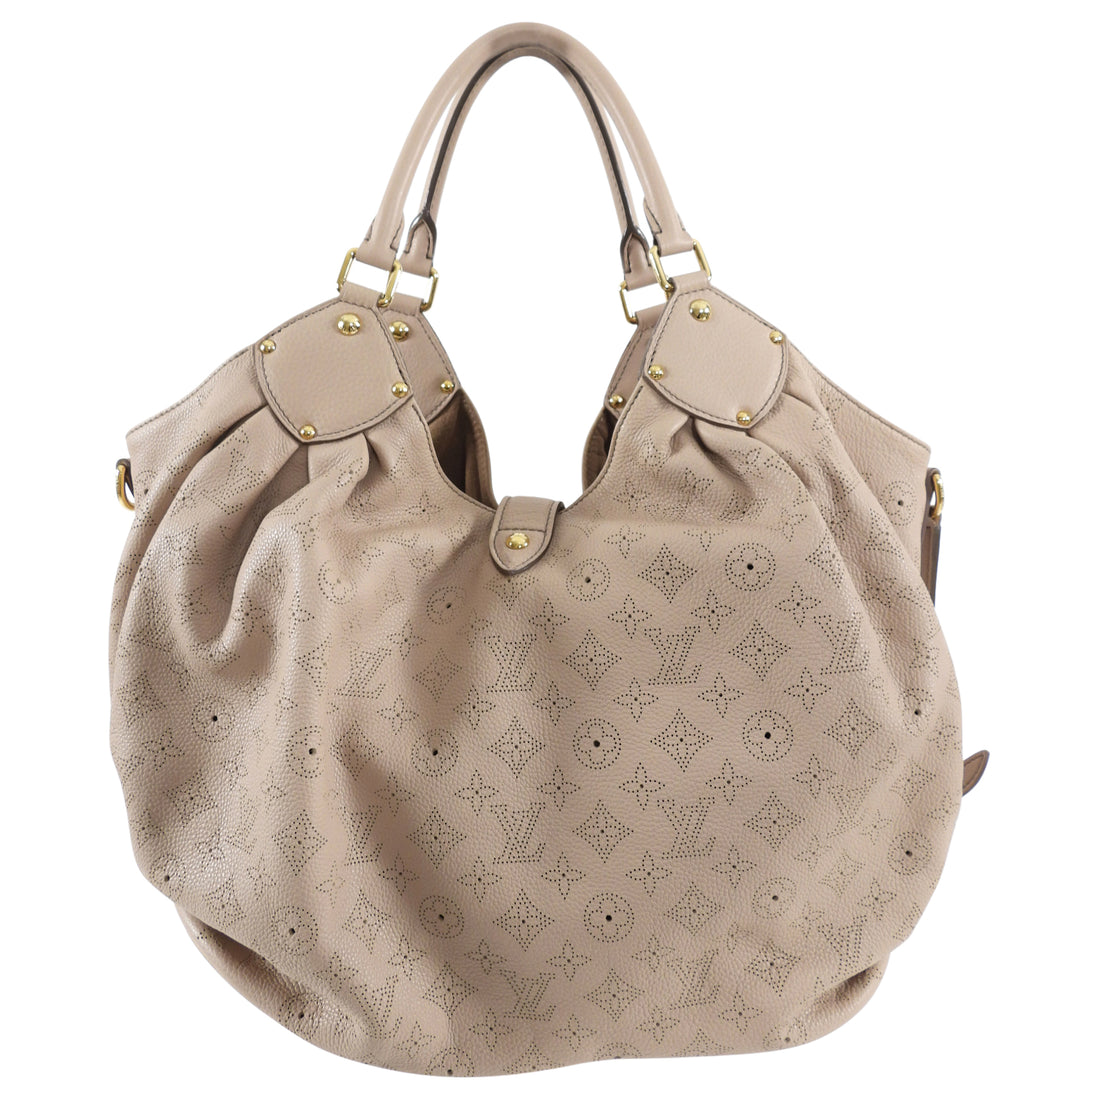 LOUIS VUITTON MAHINA LEATHER BEIGE TOTE # MB0028 for